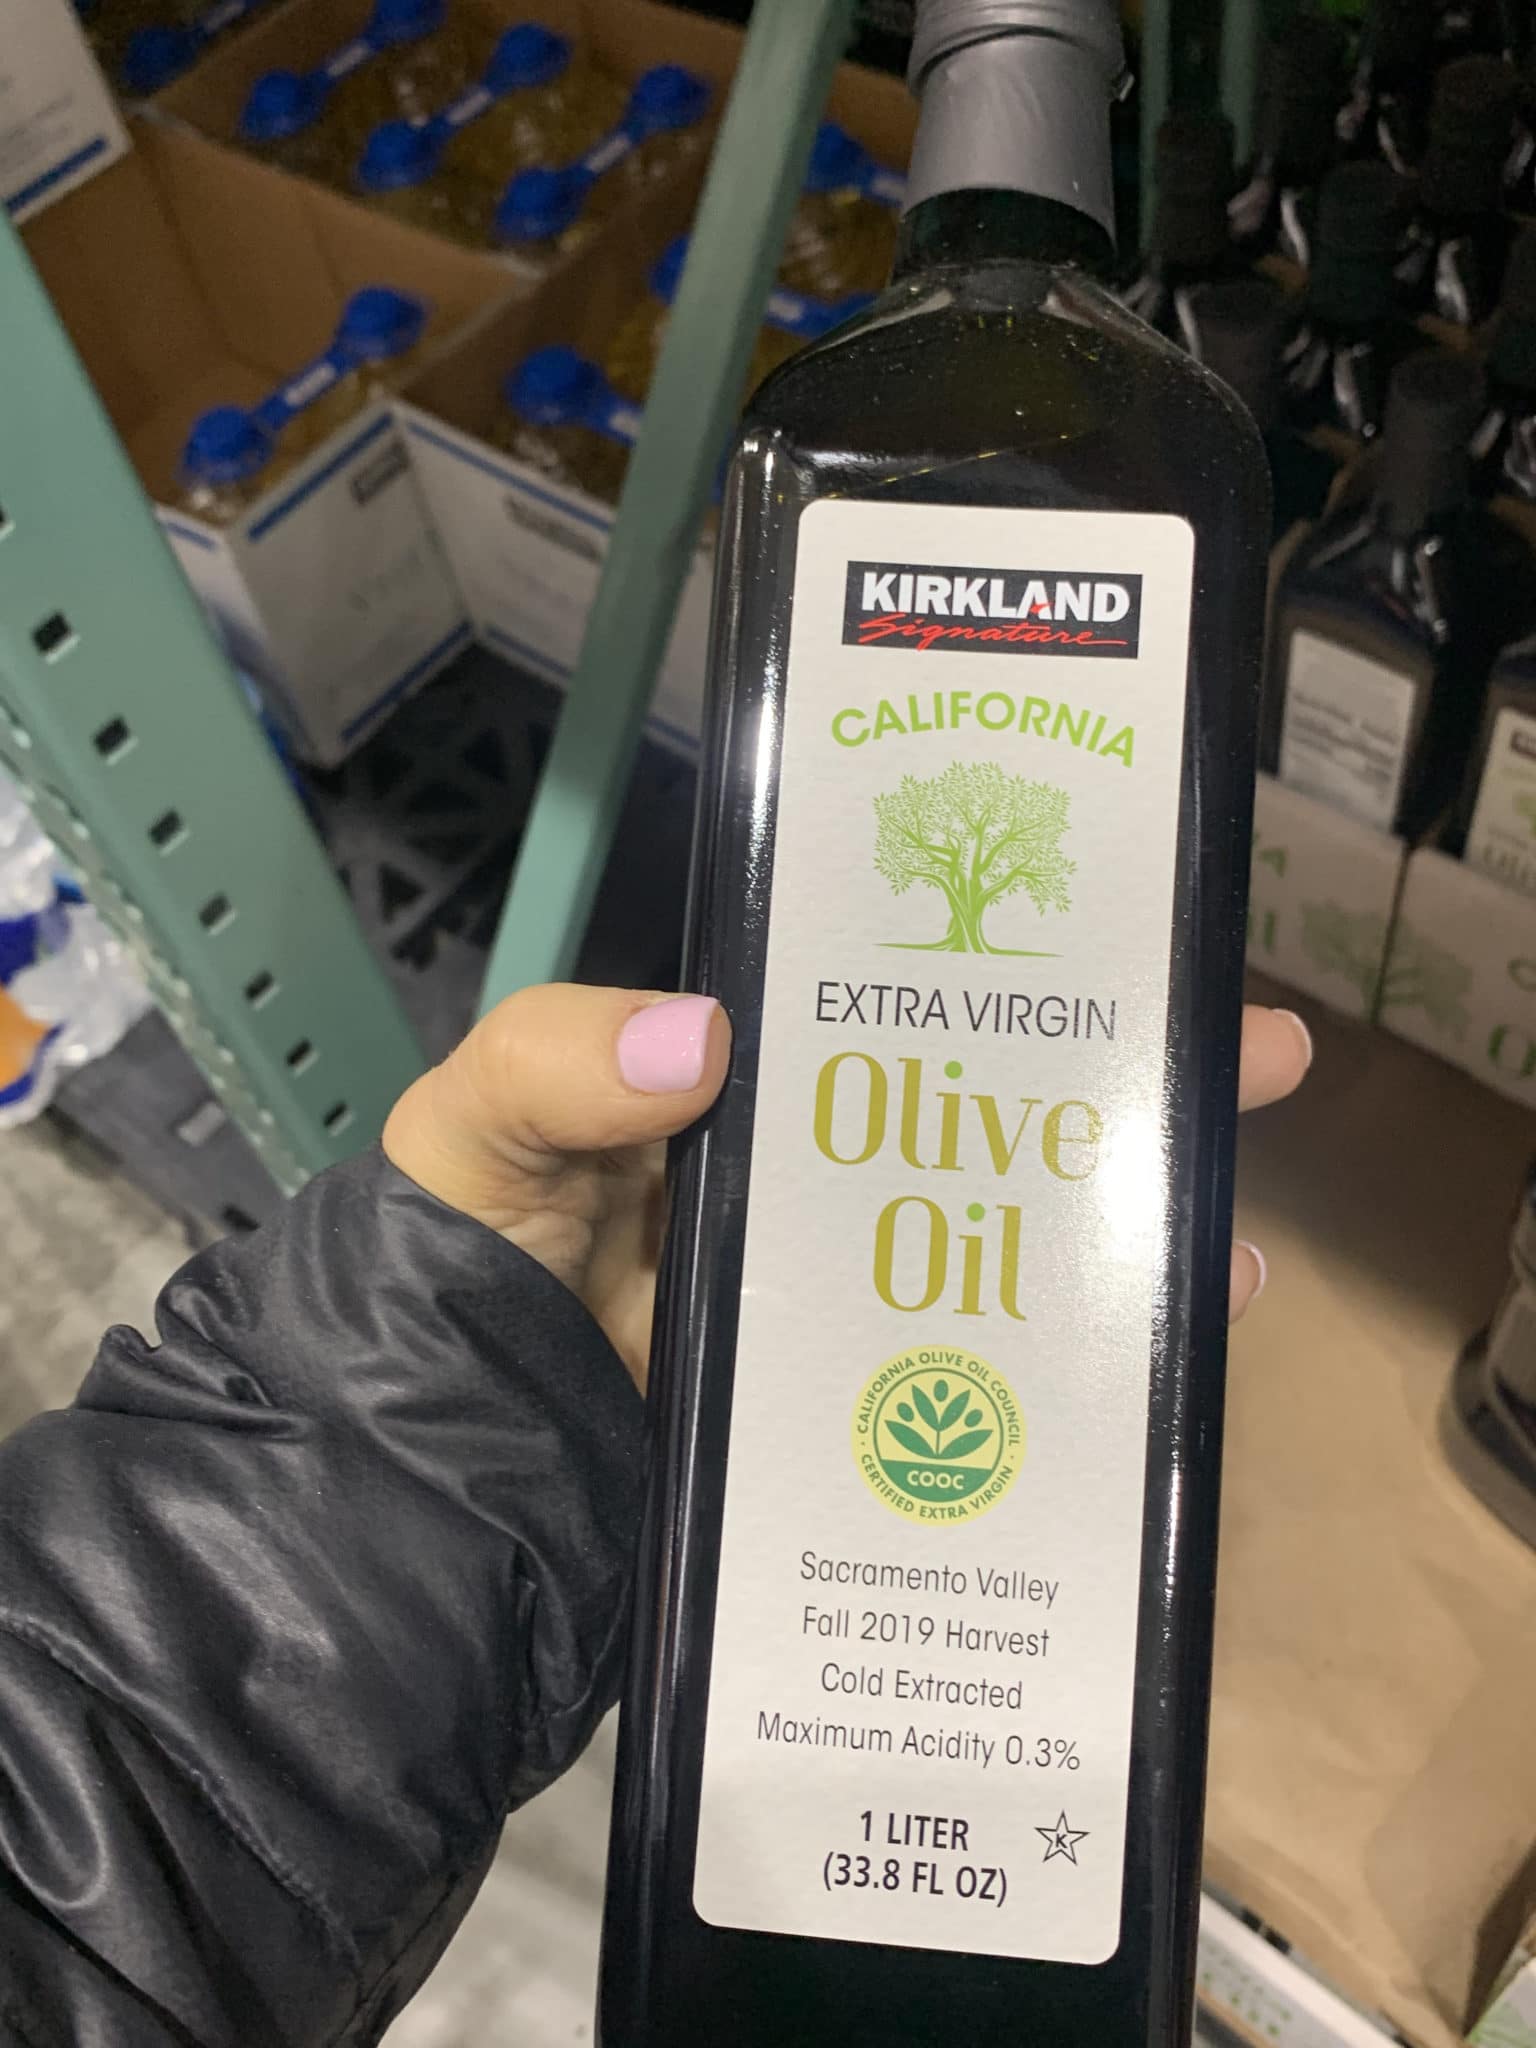 Kirkland Olive OIl from Costco